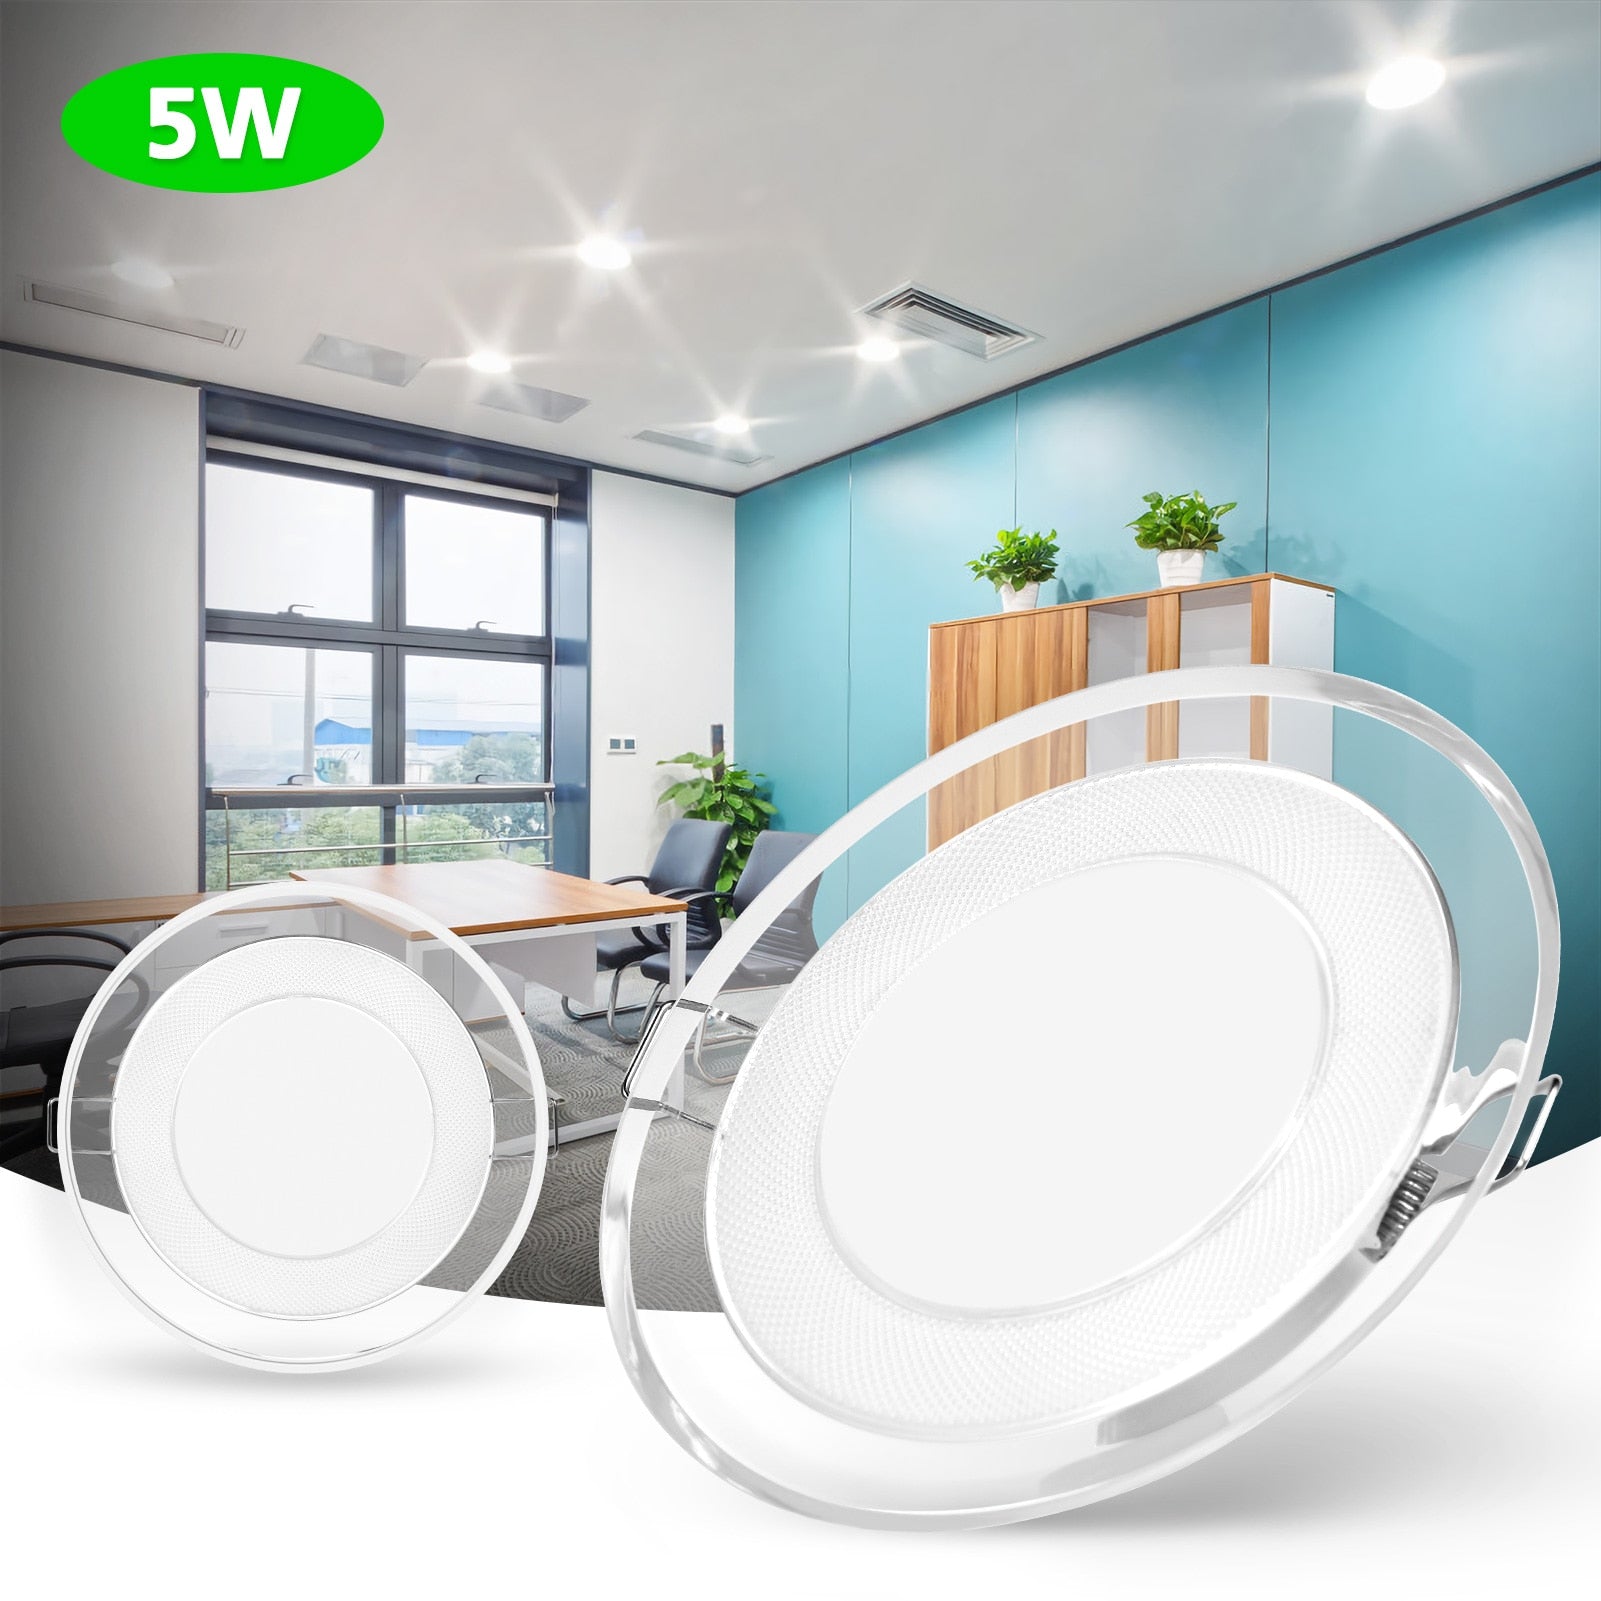 Led Downlight Recessed Ceiling Light 5W 220V No-Flicker 500LM LED Downlight Panel Round Indoor Lighting Decorations